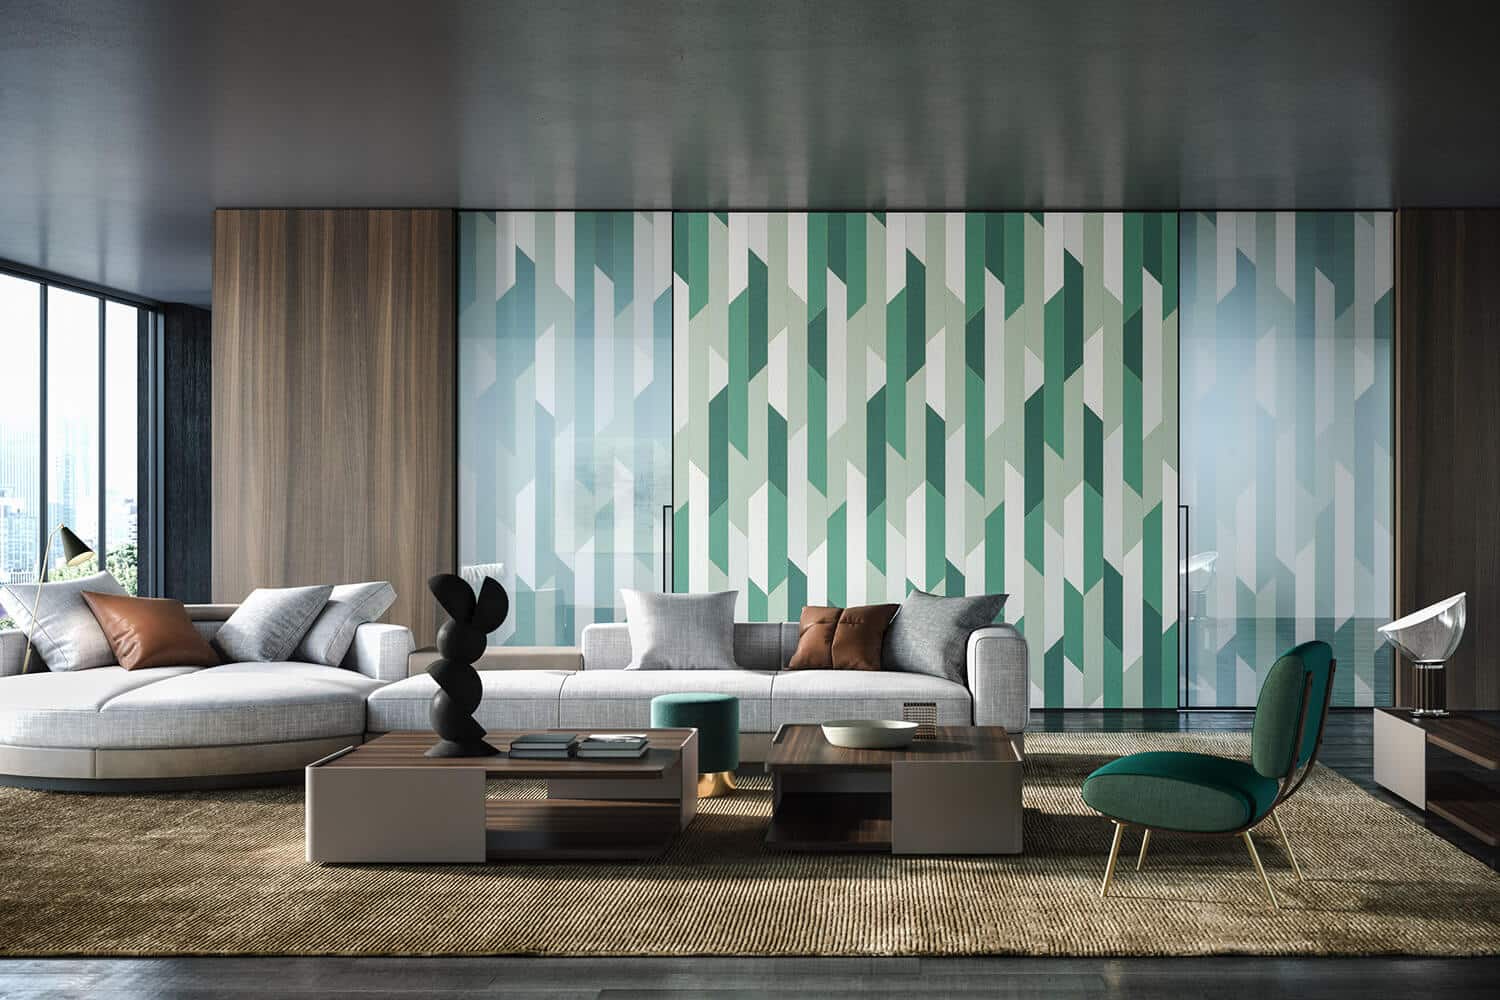 Non-transparent custom sliding glass doors with modern geometric pattern in green hues. Matching conjoining wall.